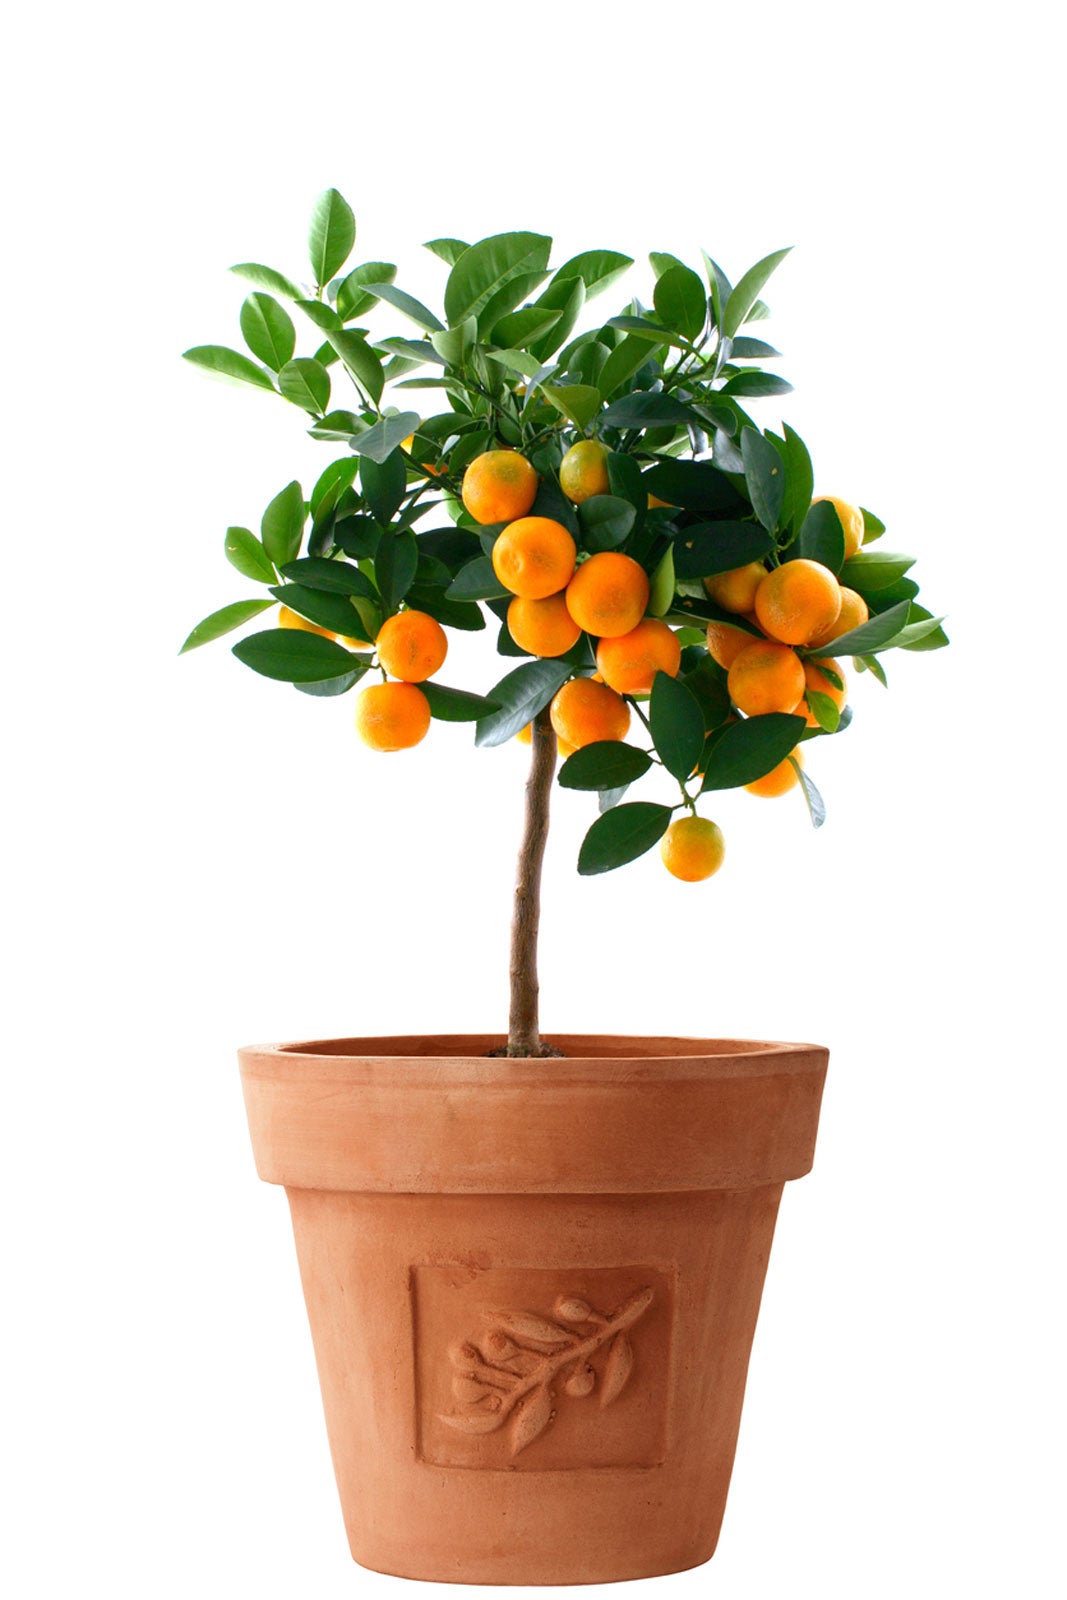 How to Grow and Care for a Calamondin Orange Tree